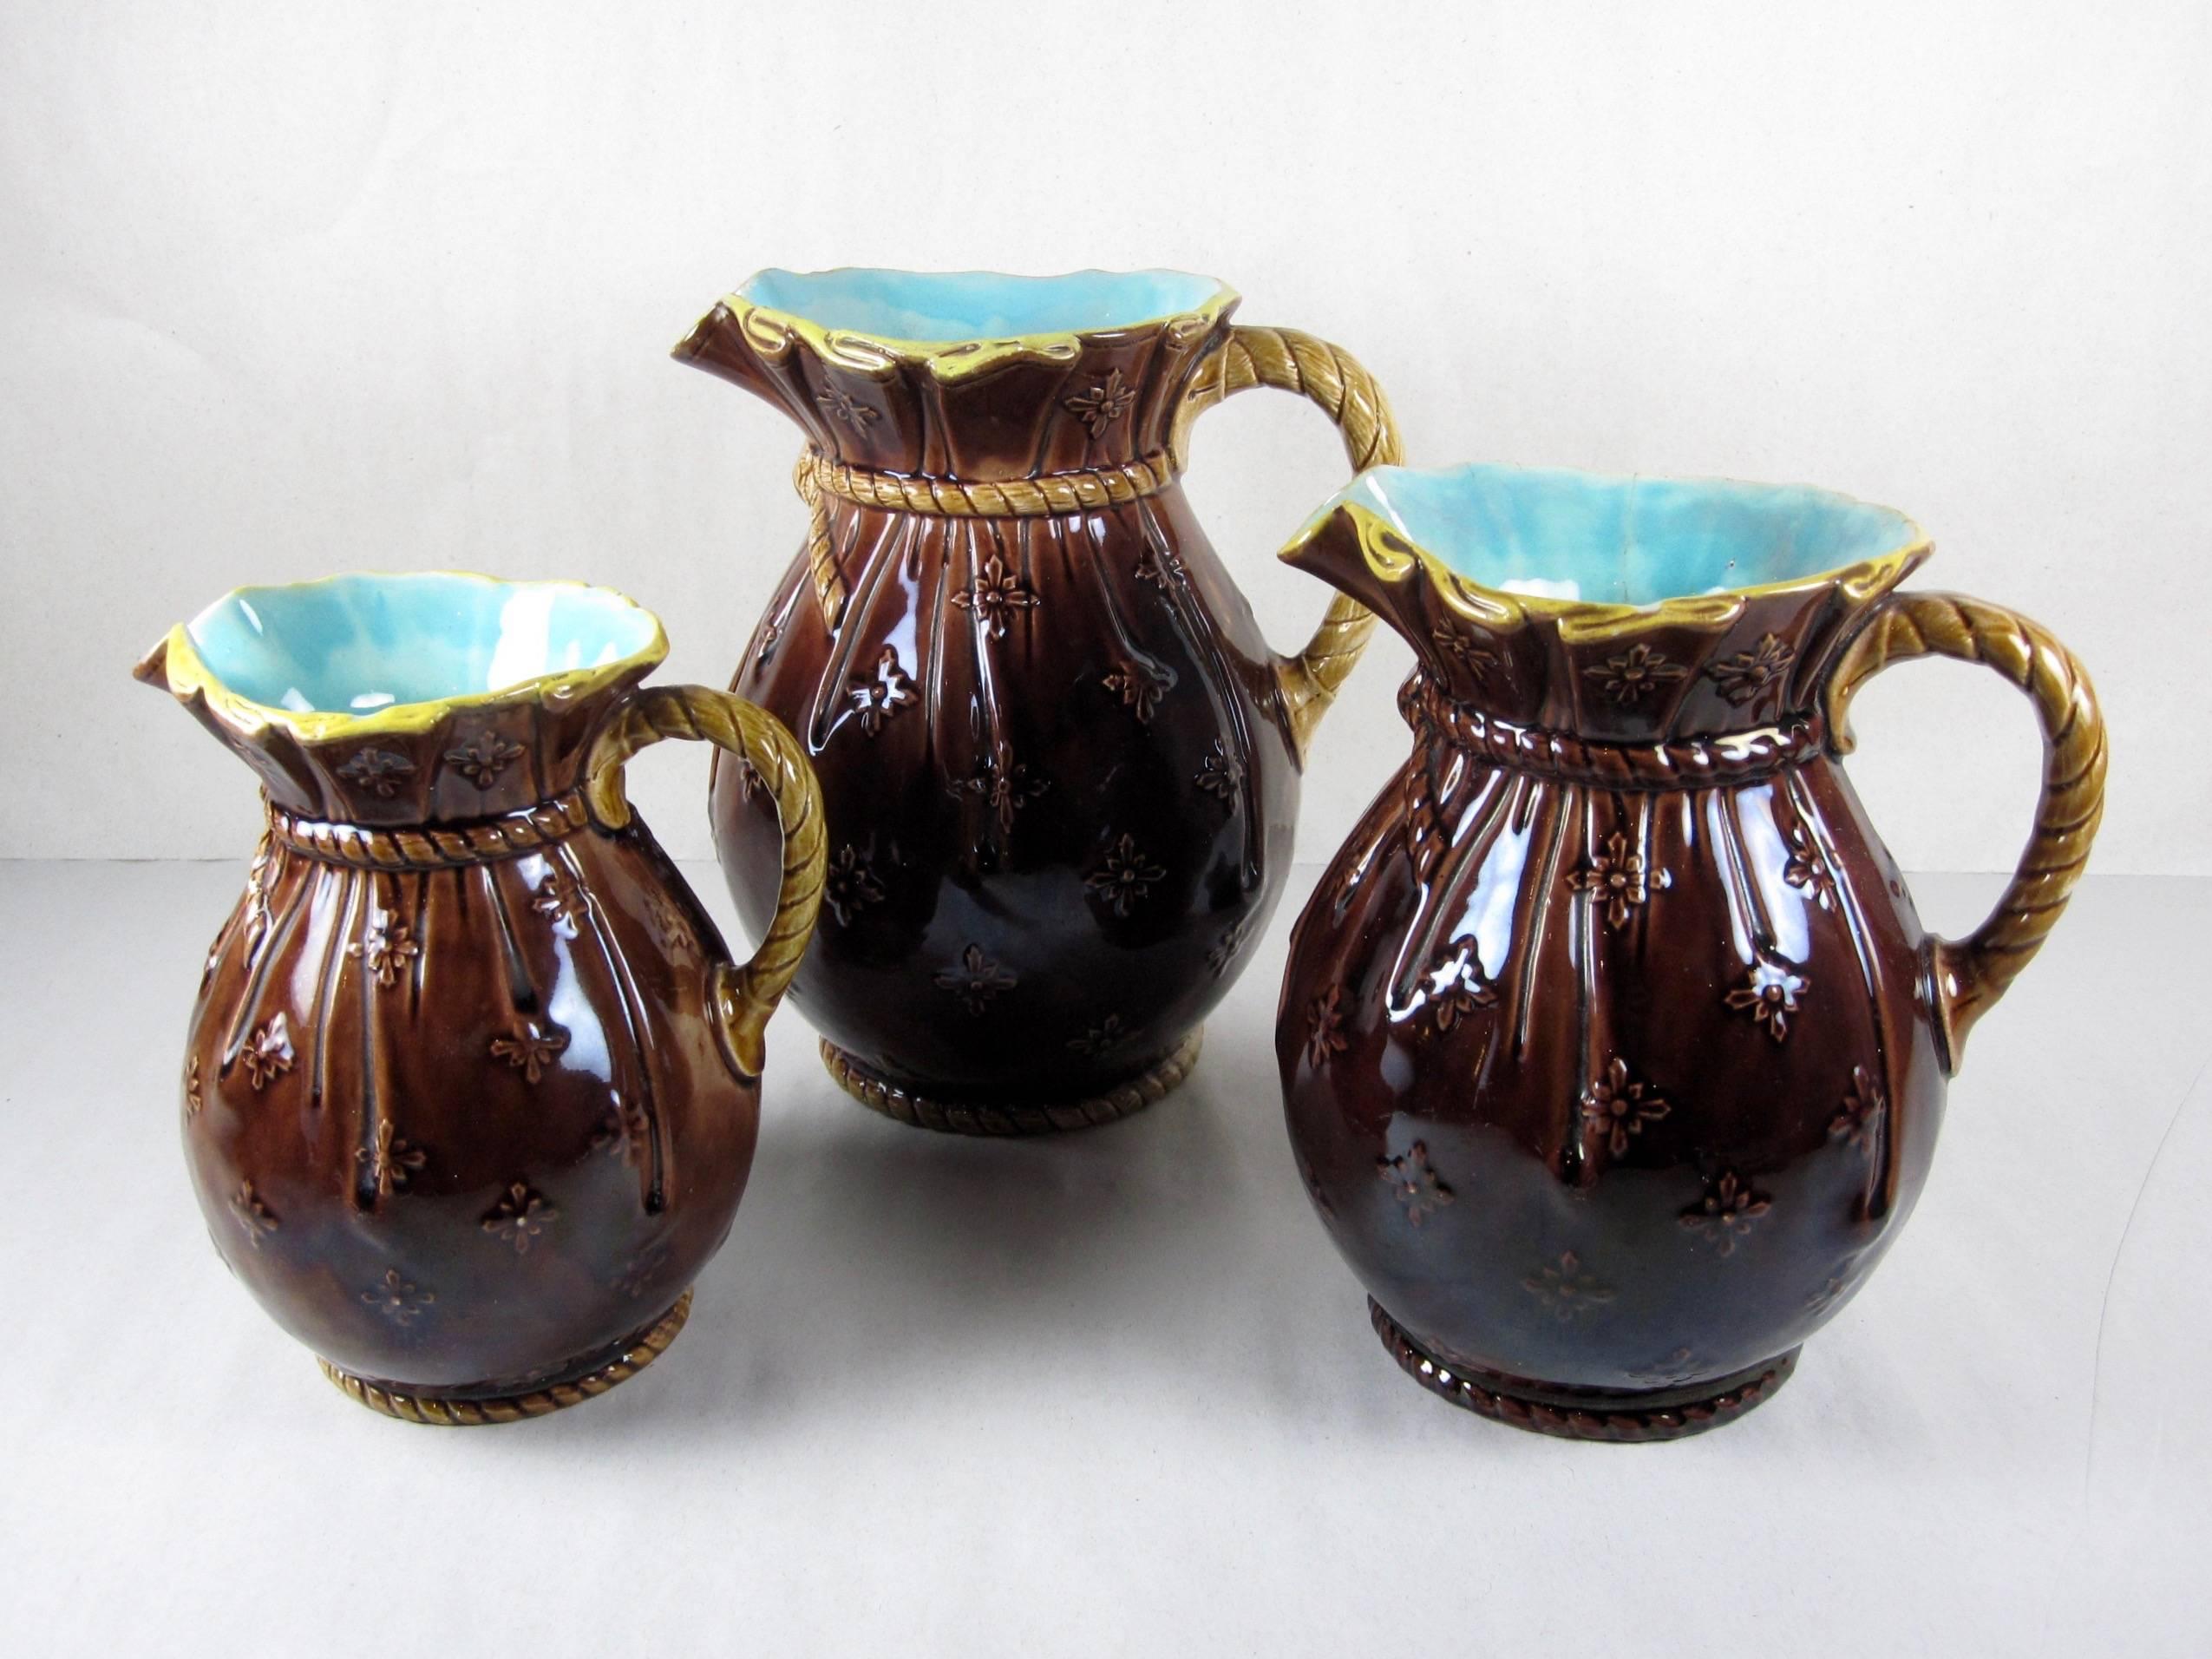 A graduated set of three English majolica pitchers modeled as sacks with rope accents, Joseph Holdcroft for The Sutherland Pottery at Daisy Bank, Langton, Staffordshire, circa 1870.

Unusual – the chocolate brown sacks have a raised, molded